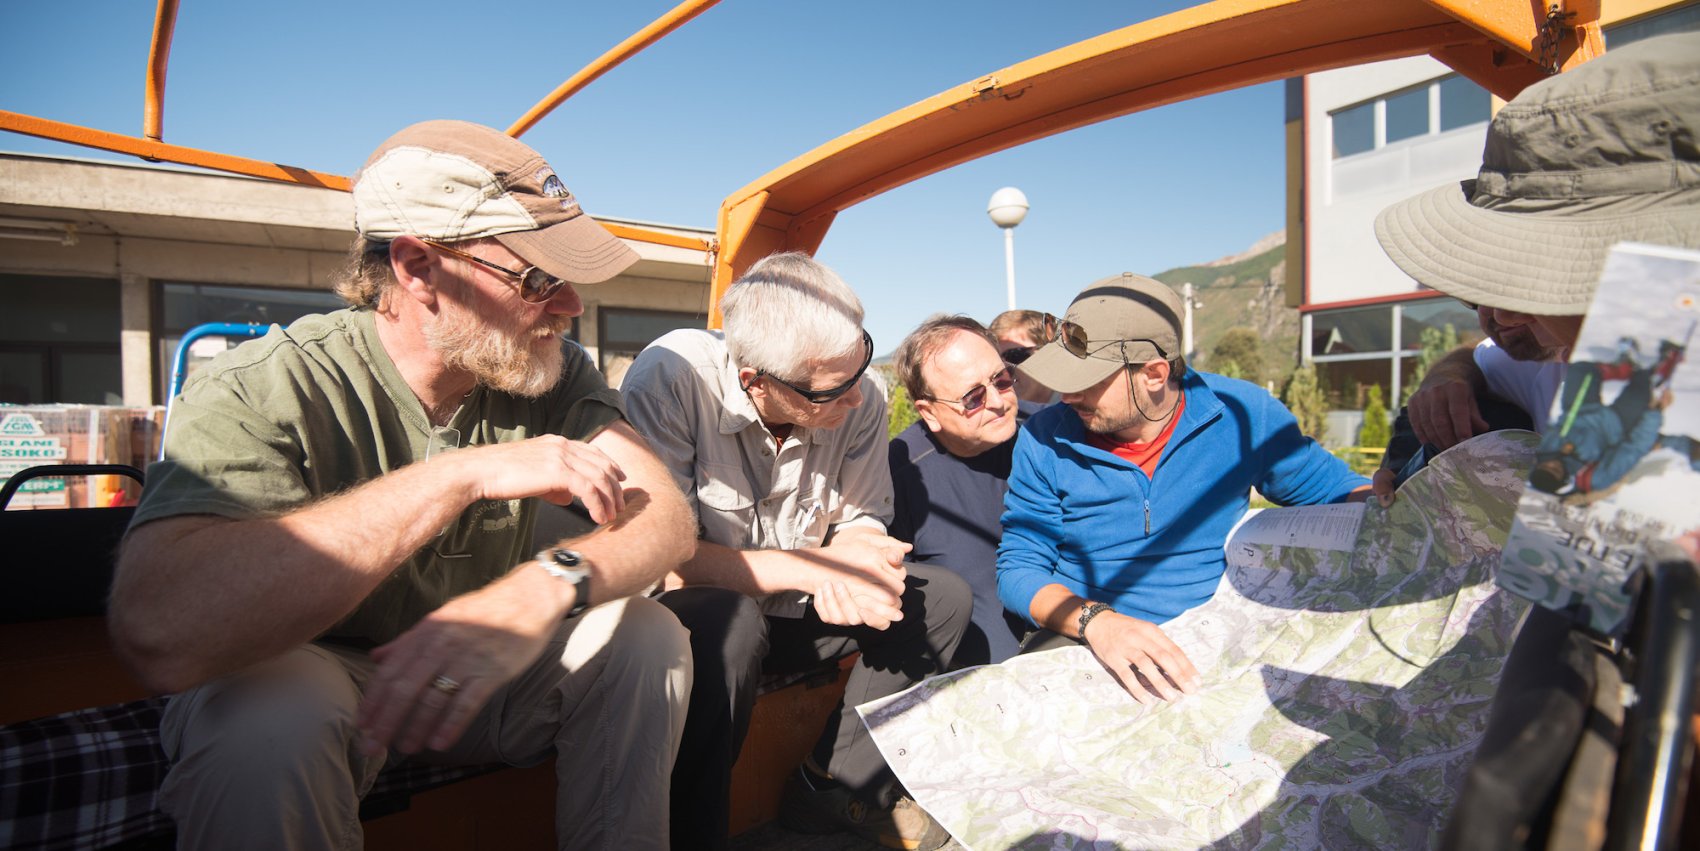 A group of men sitting in an open car looking at a map and devising a plan all together